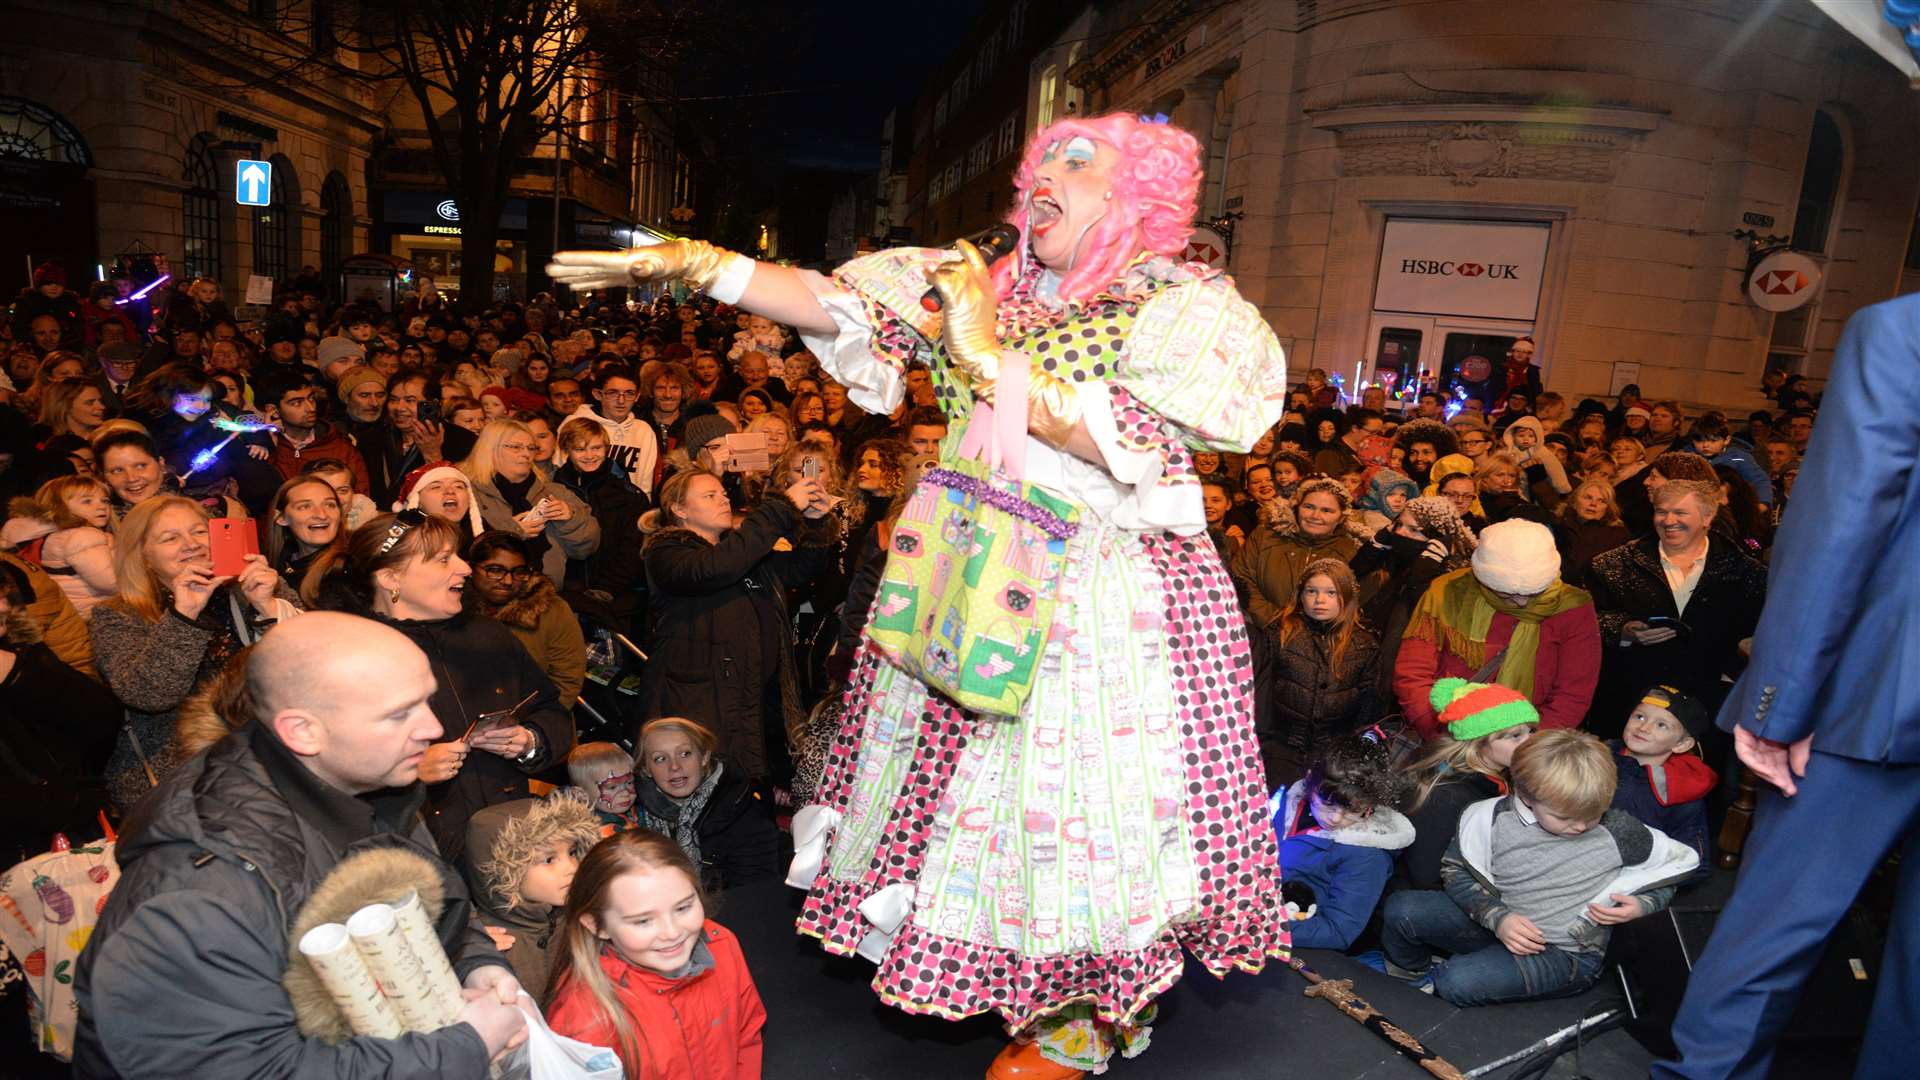 Panto Dame brings a comedy to the event